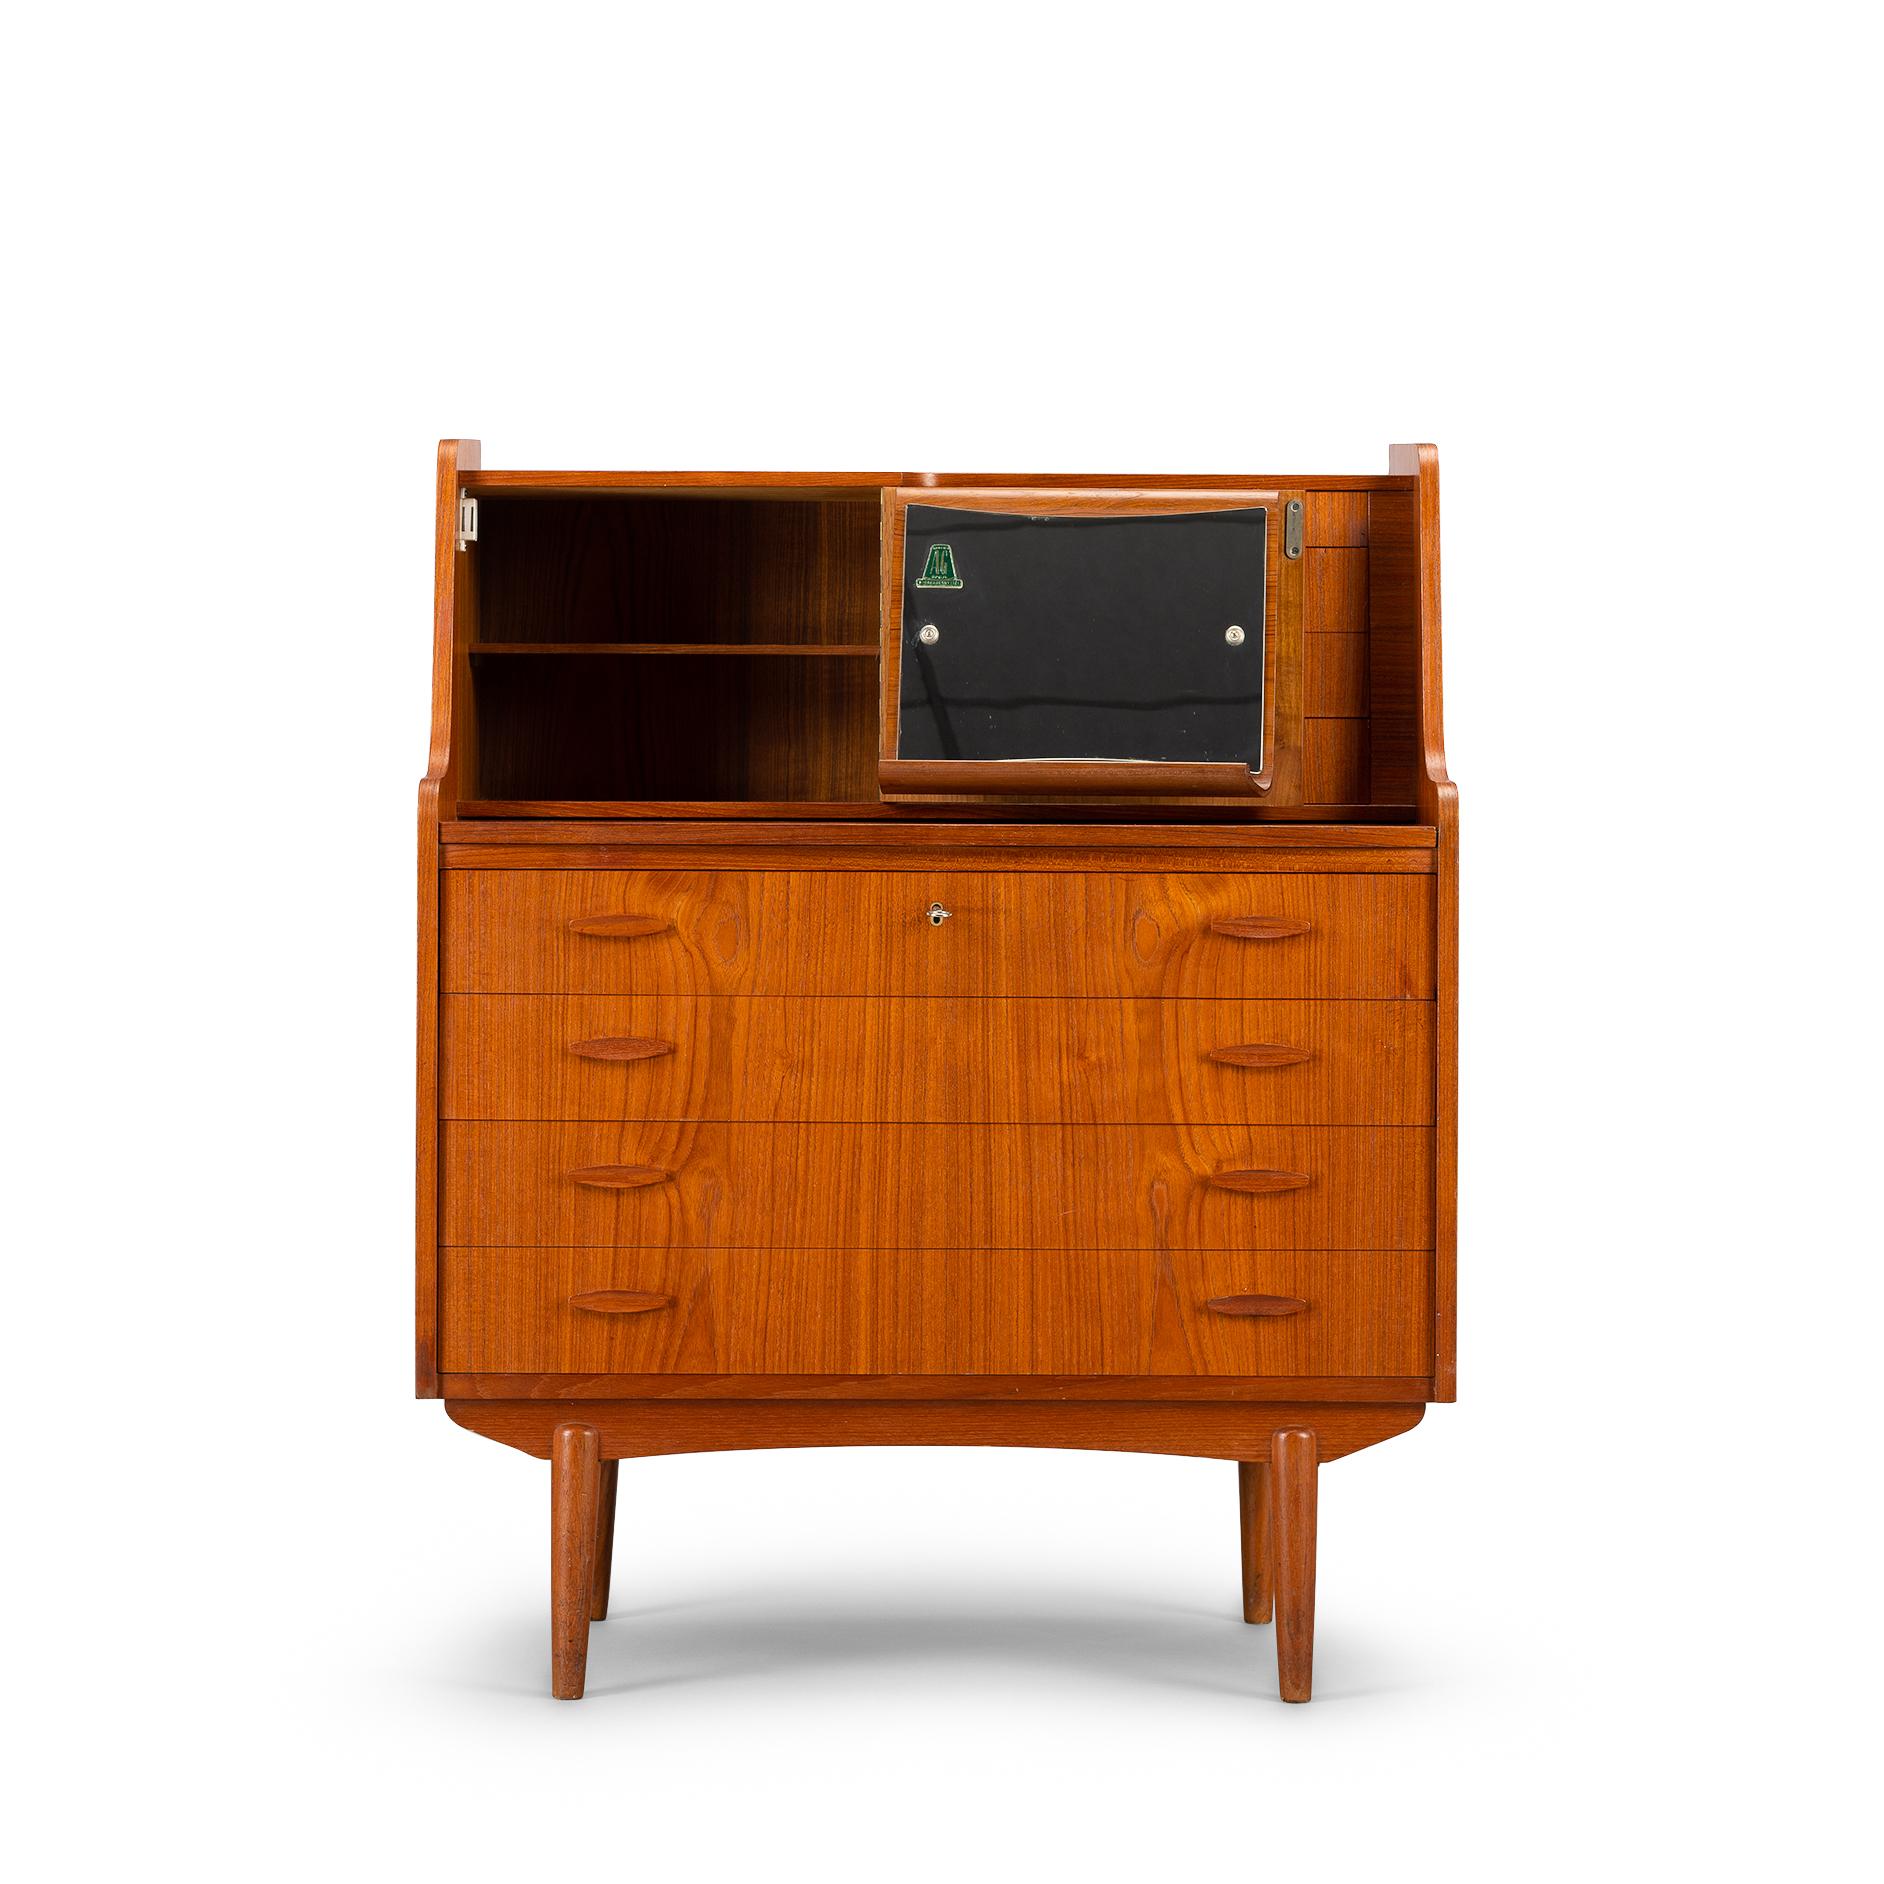 Easy does it: a writing desk when you want it to be one! This writing desk has it all. It is made in teak veneer and has a pull out desk. Could beauty up your living room and transform into a working station if you need it. Four huge drawers, four